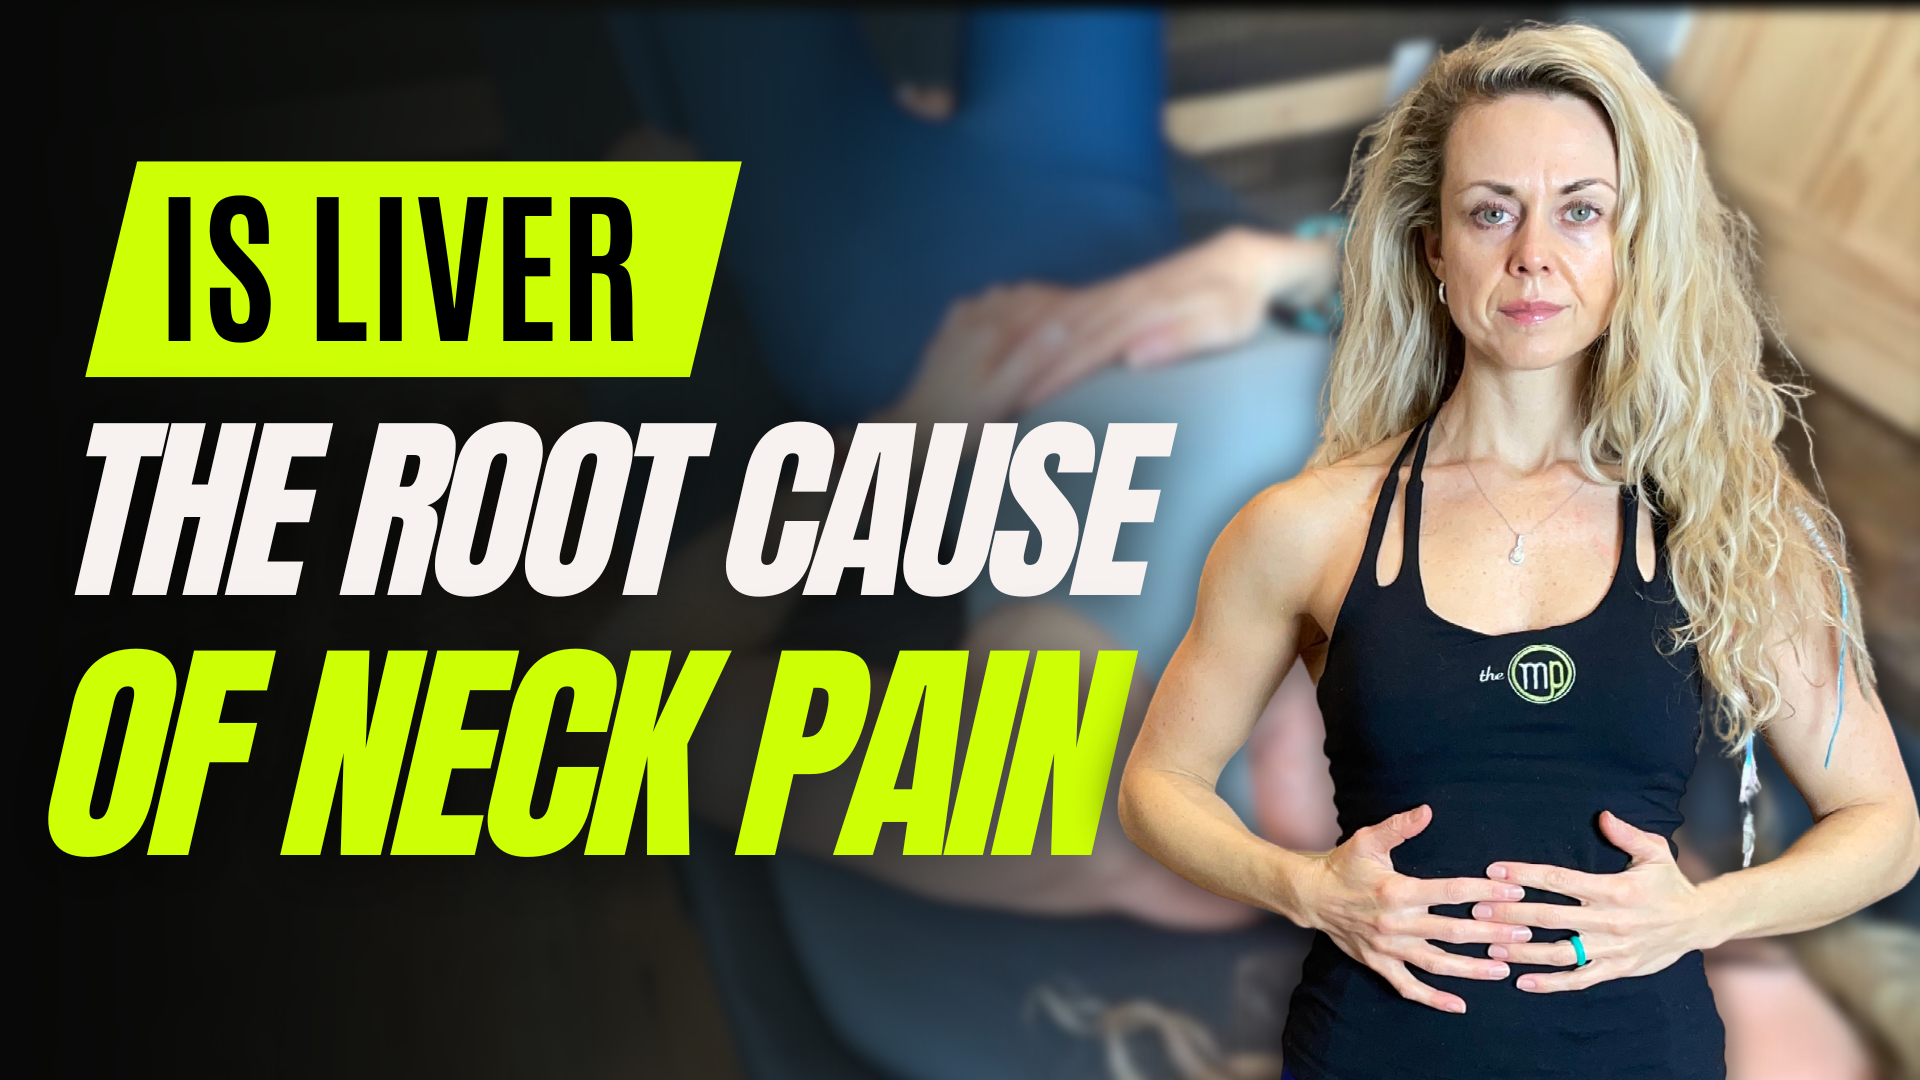 Is the Liver the Root Cause of Your Neck Pain?